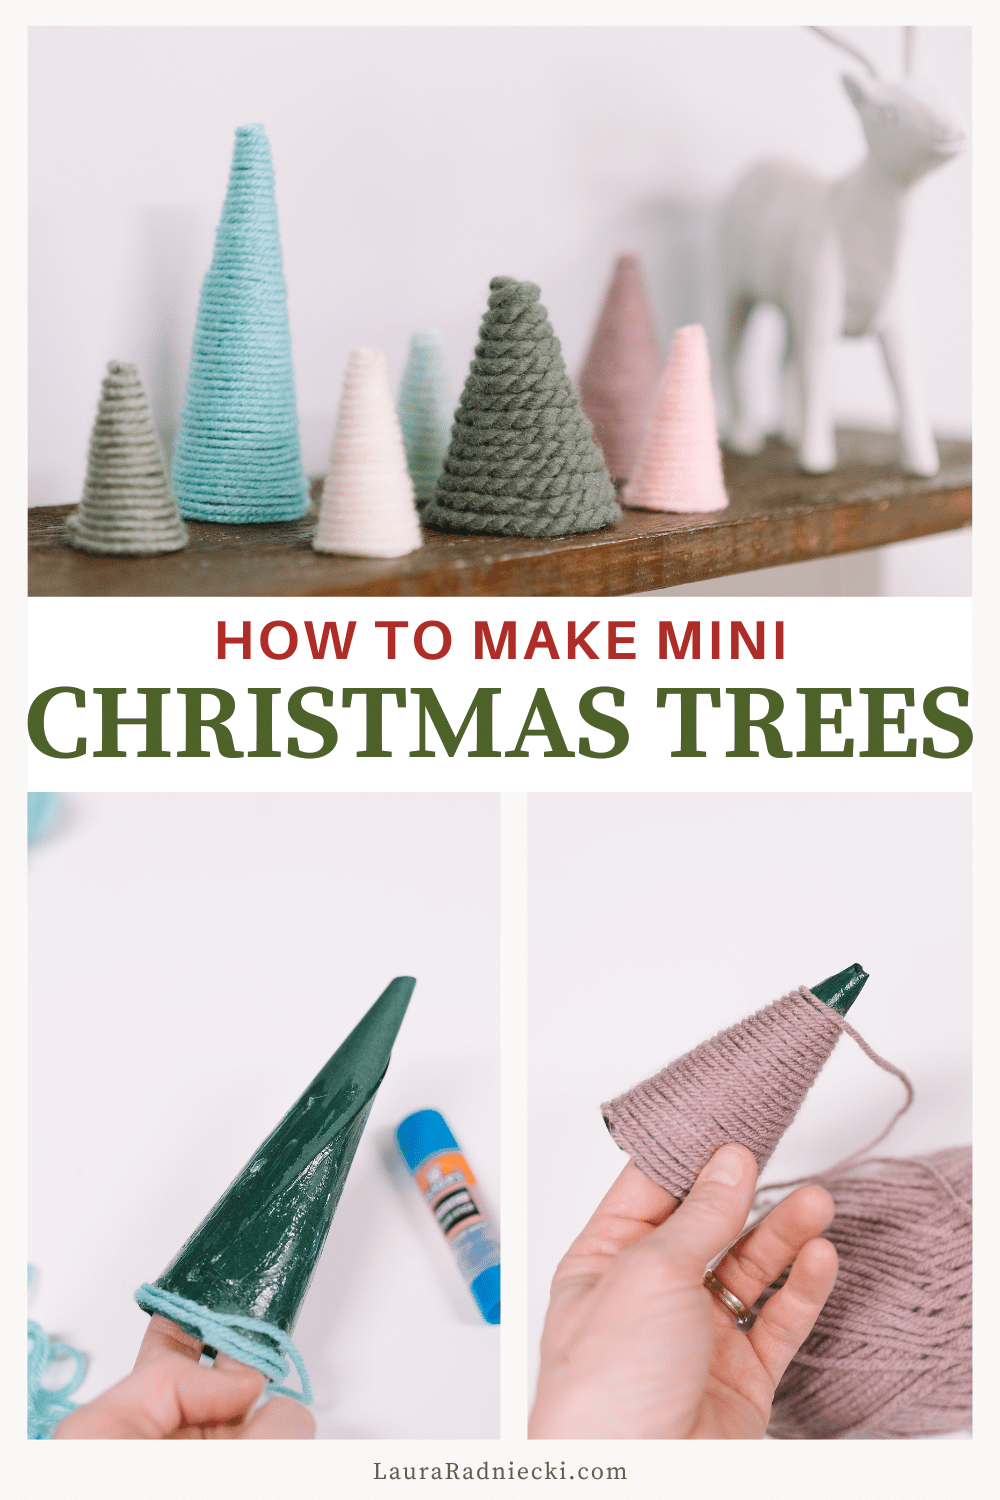 How to Make Mini Christmas Trees with Paper Cones and Yarn